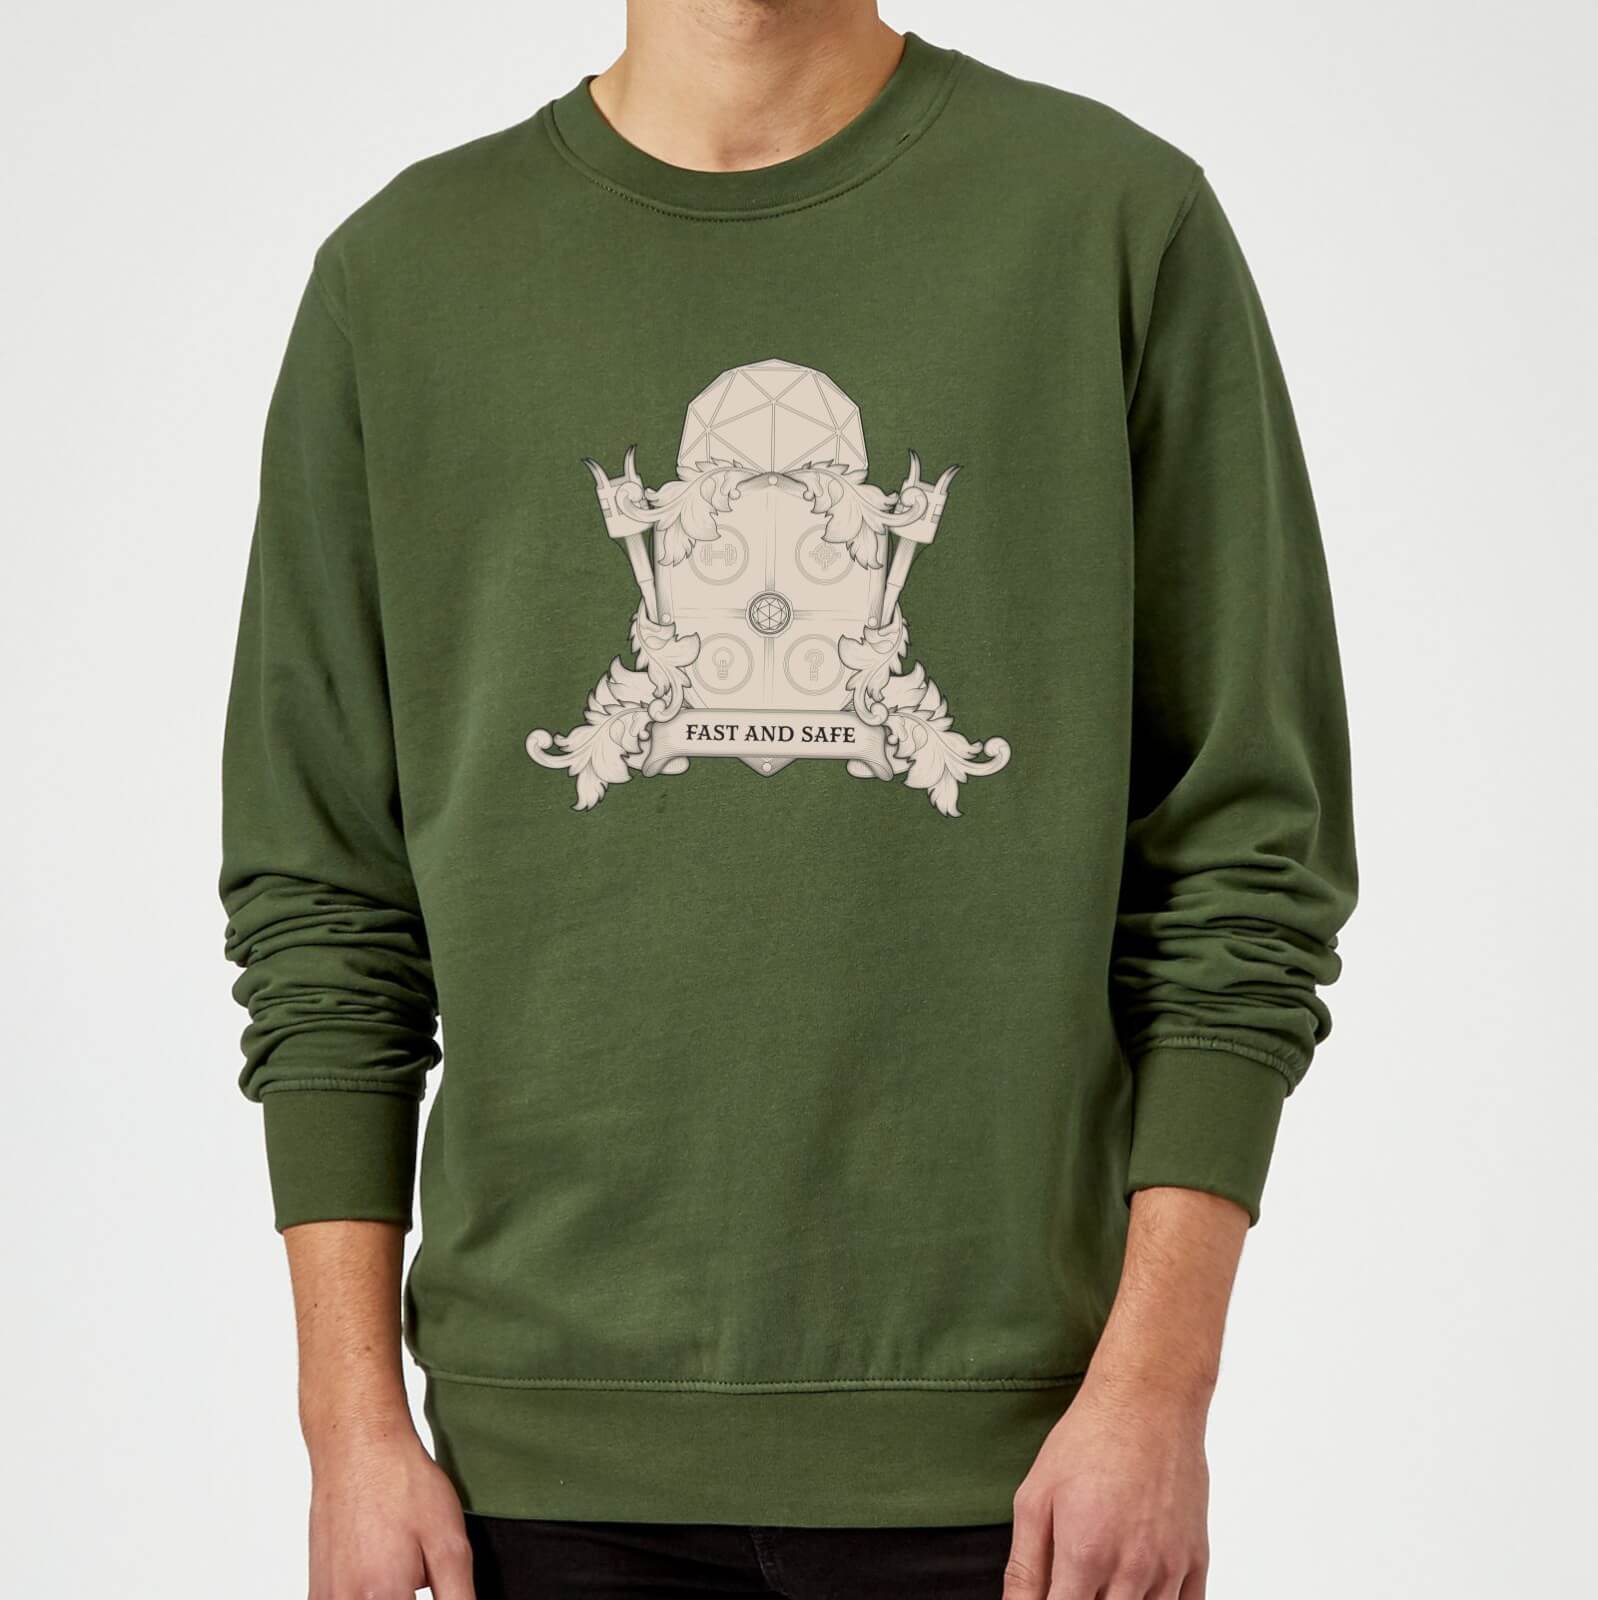 Crystal Maze Fast And Safe Crest Sweatshirt - Forest Green - XL - Forest Green